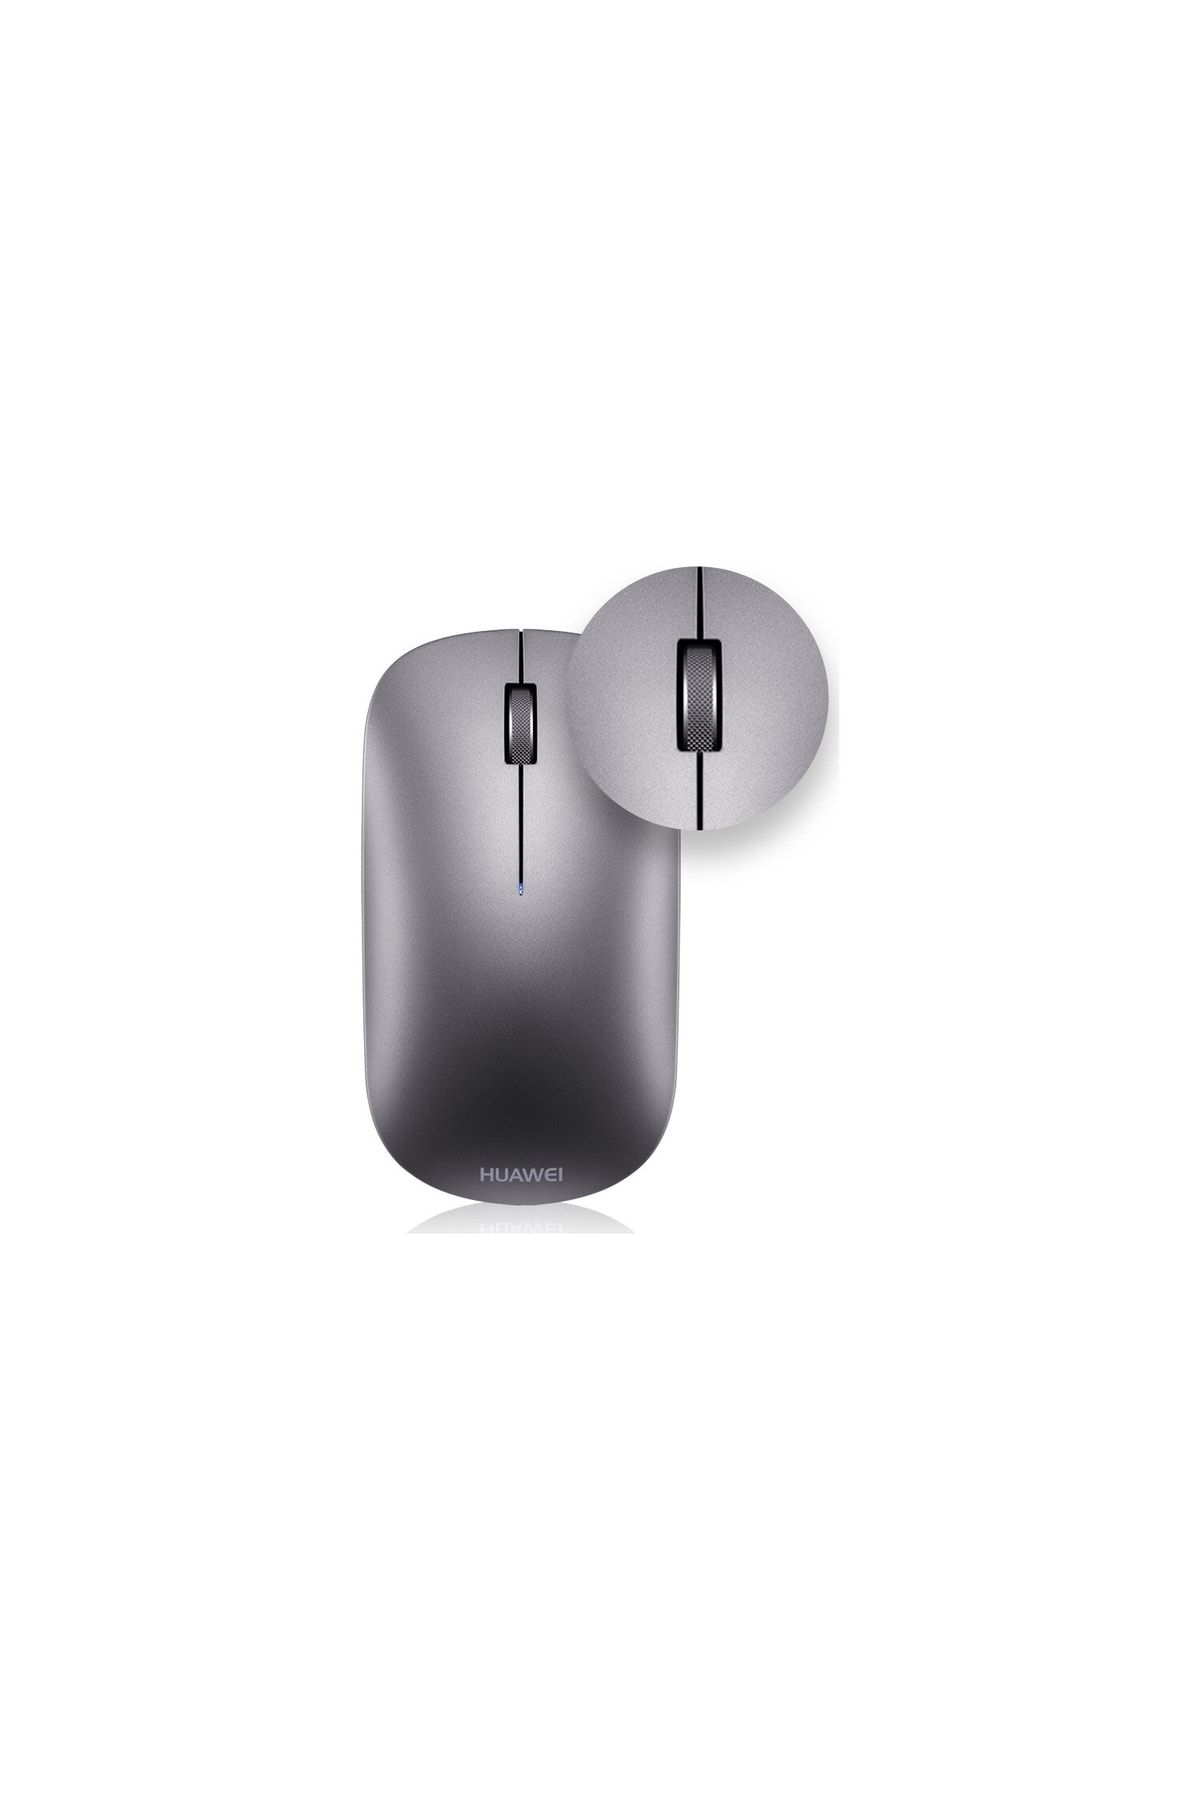 Huawei Bluetooth Mouse Cd 23